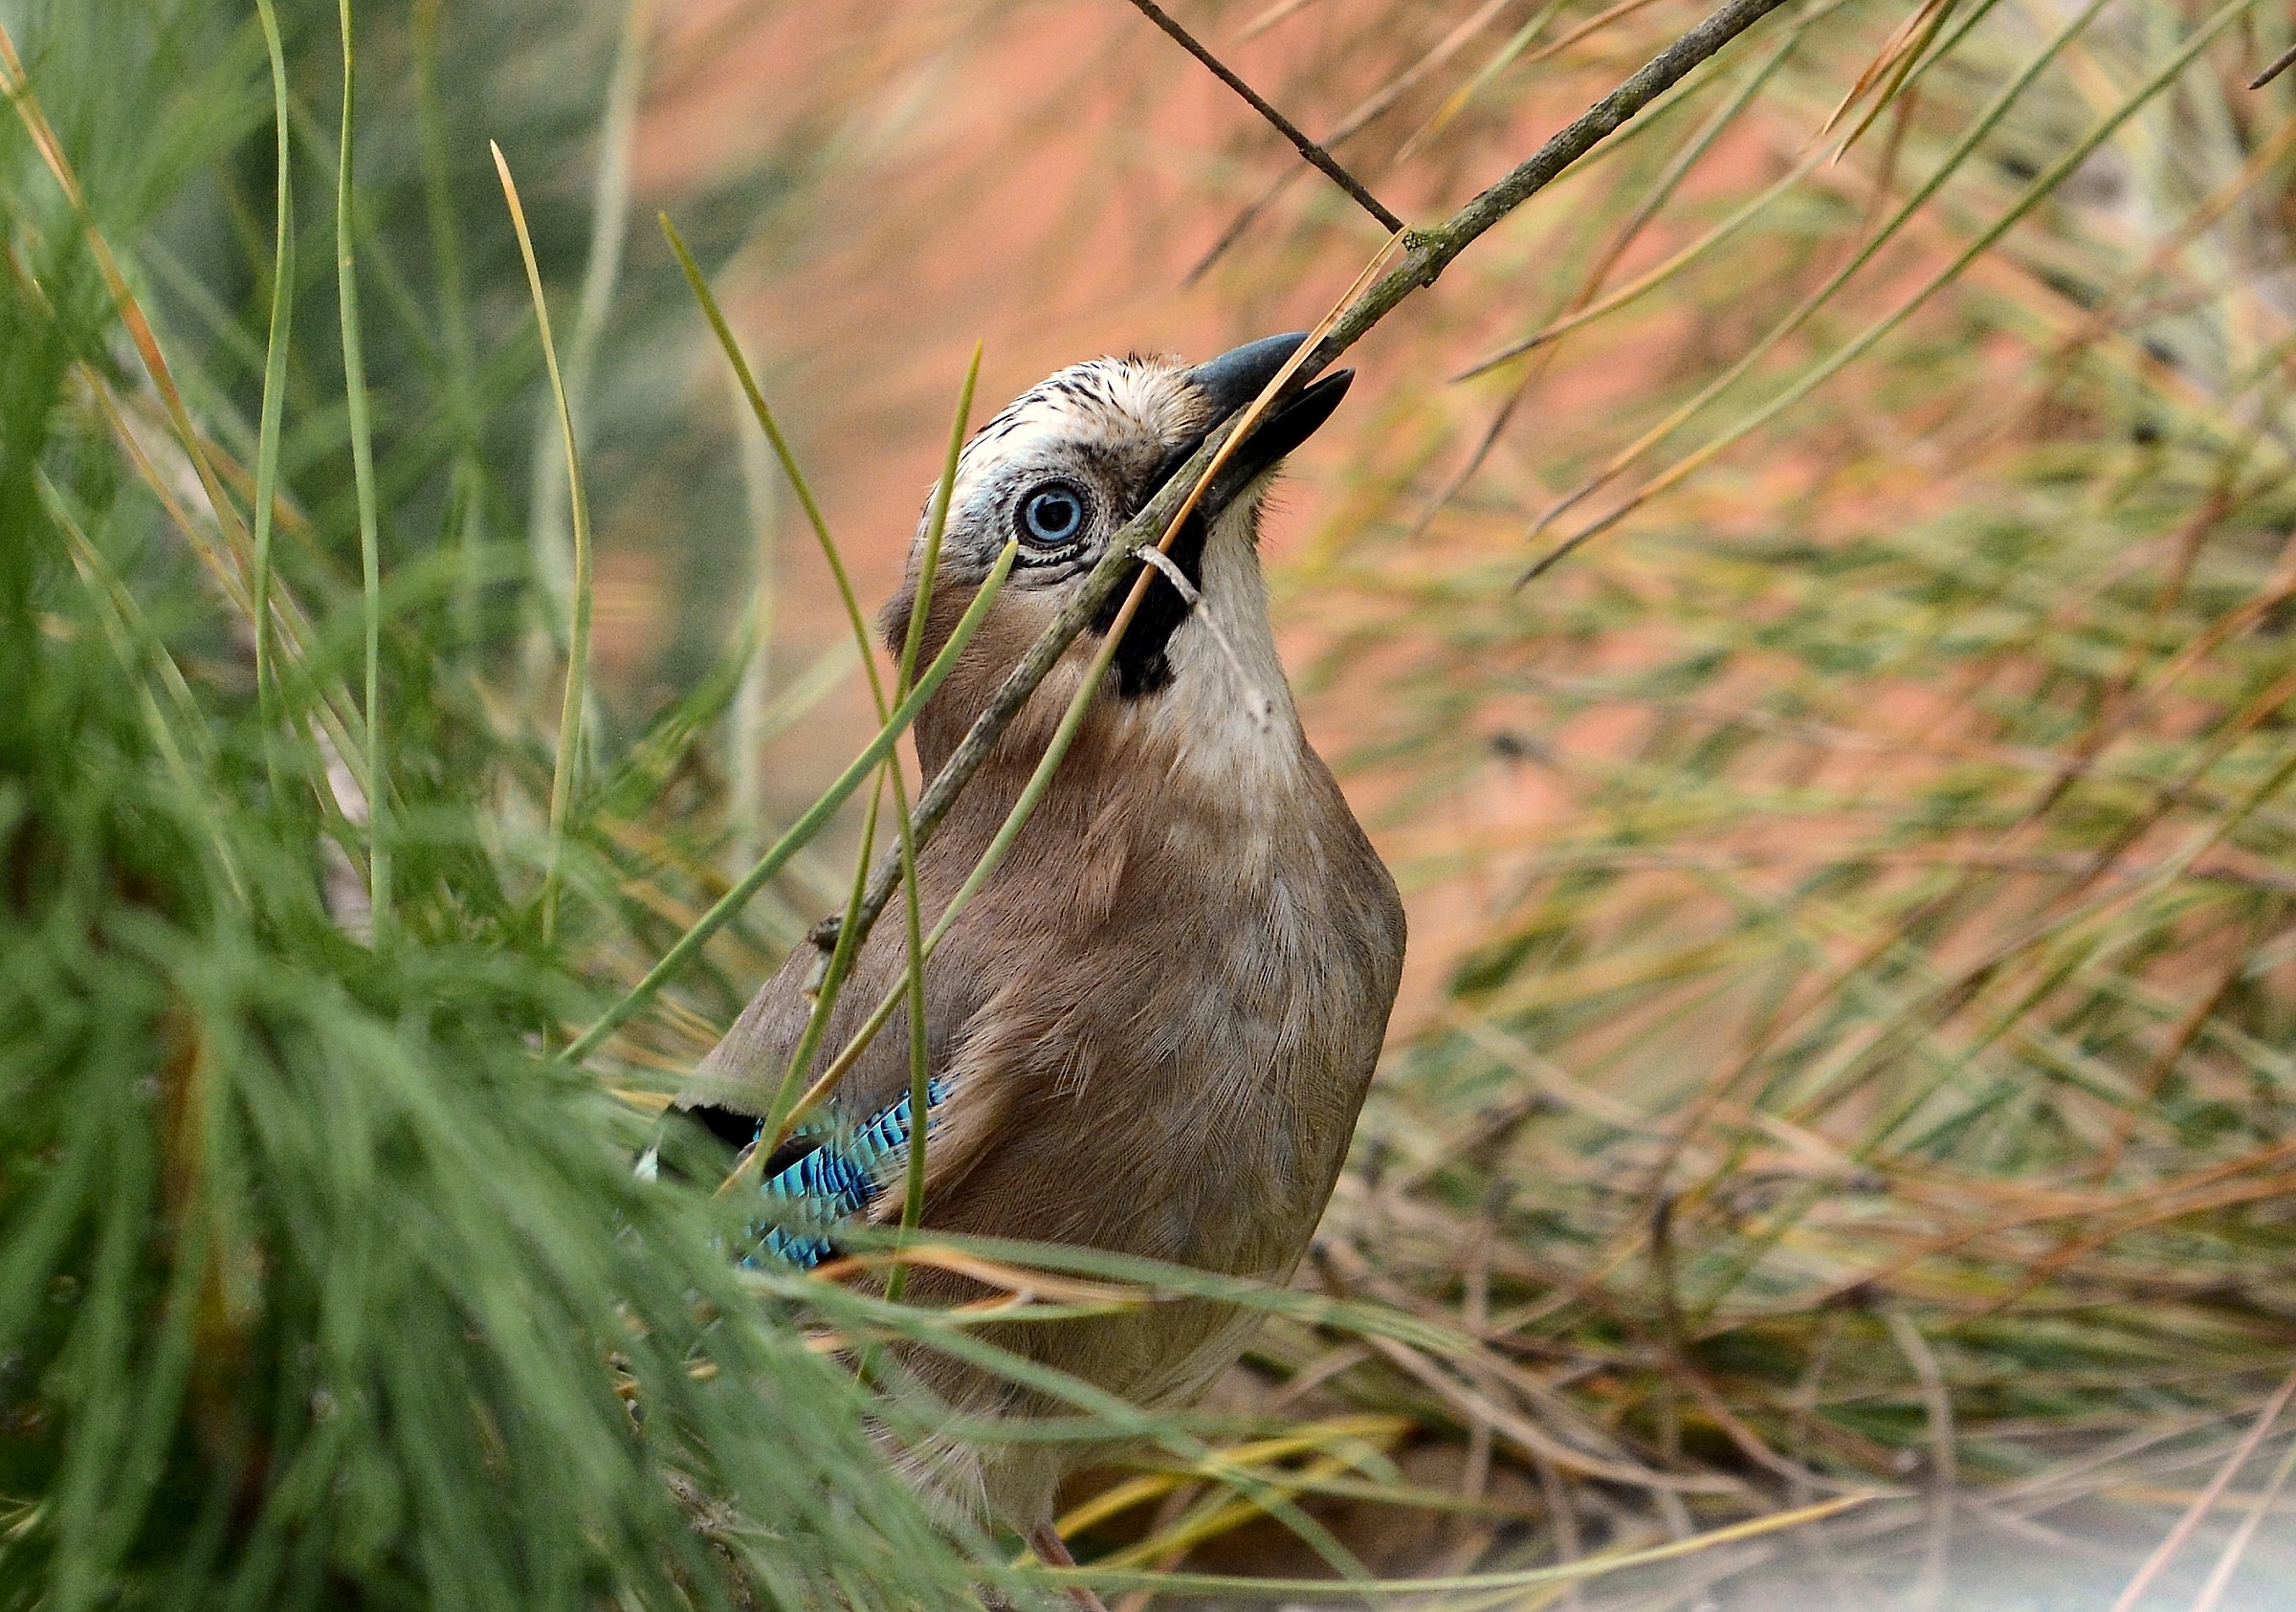 Jay intent to nest...